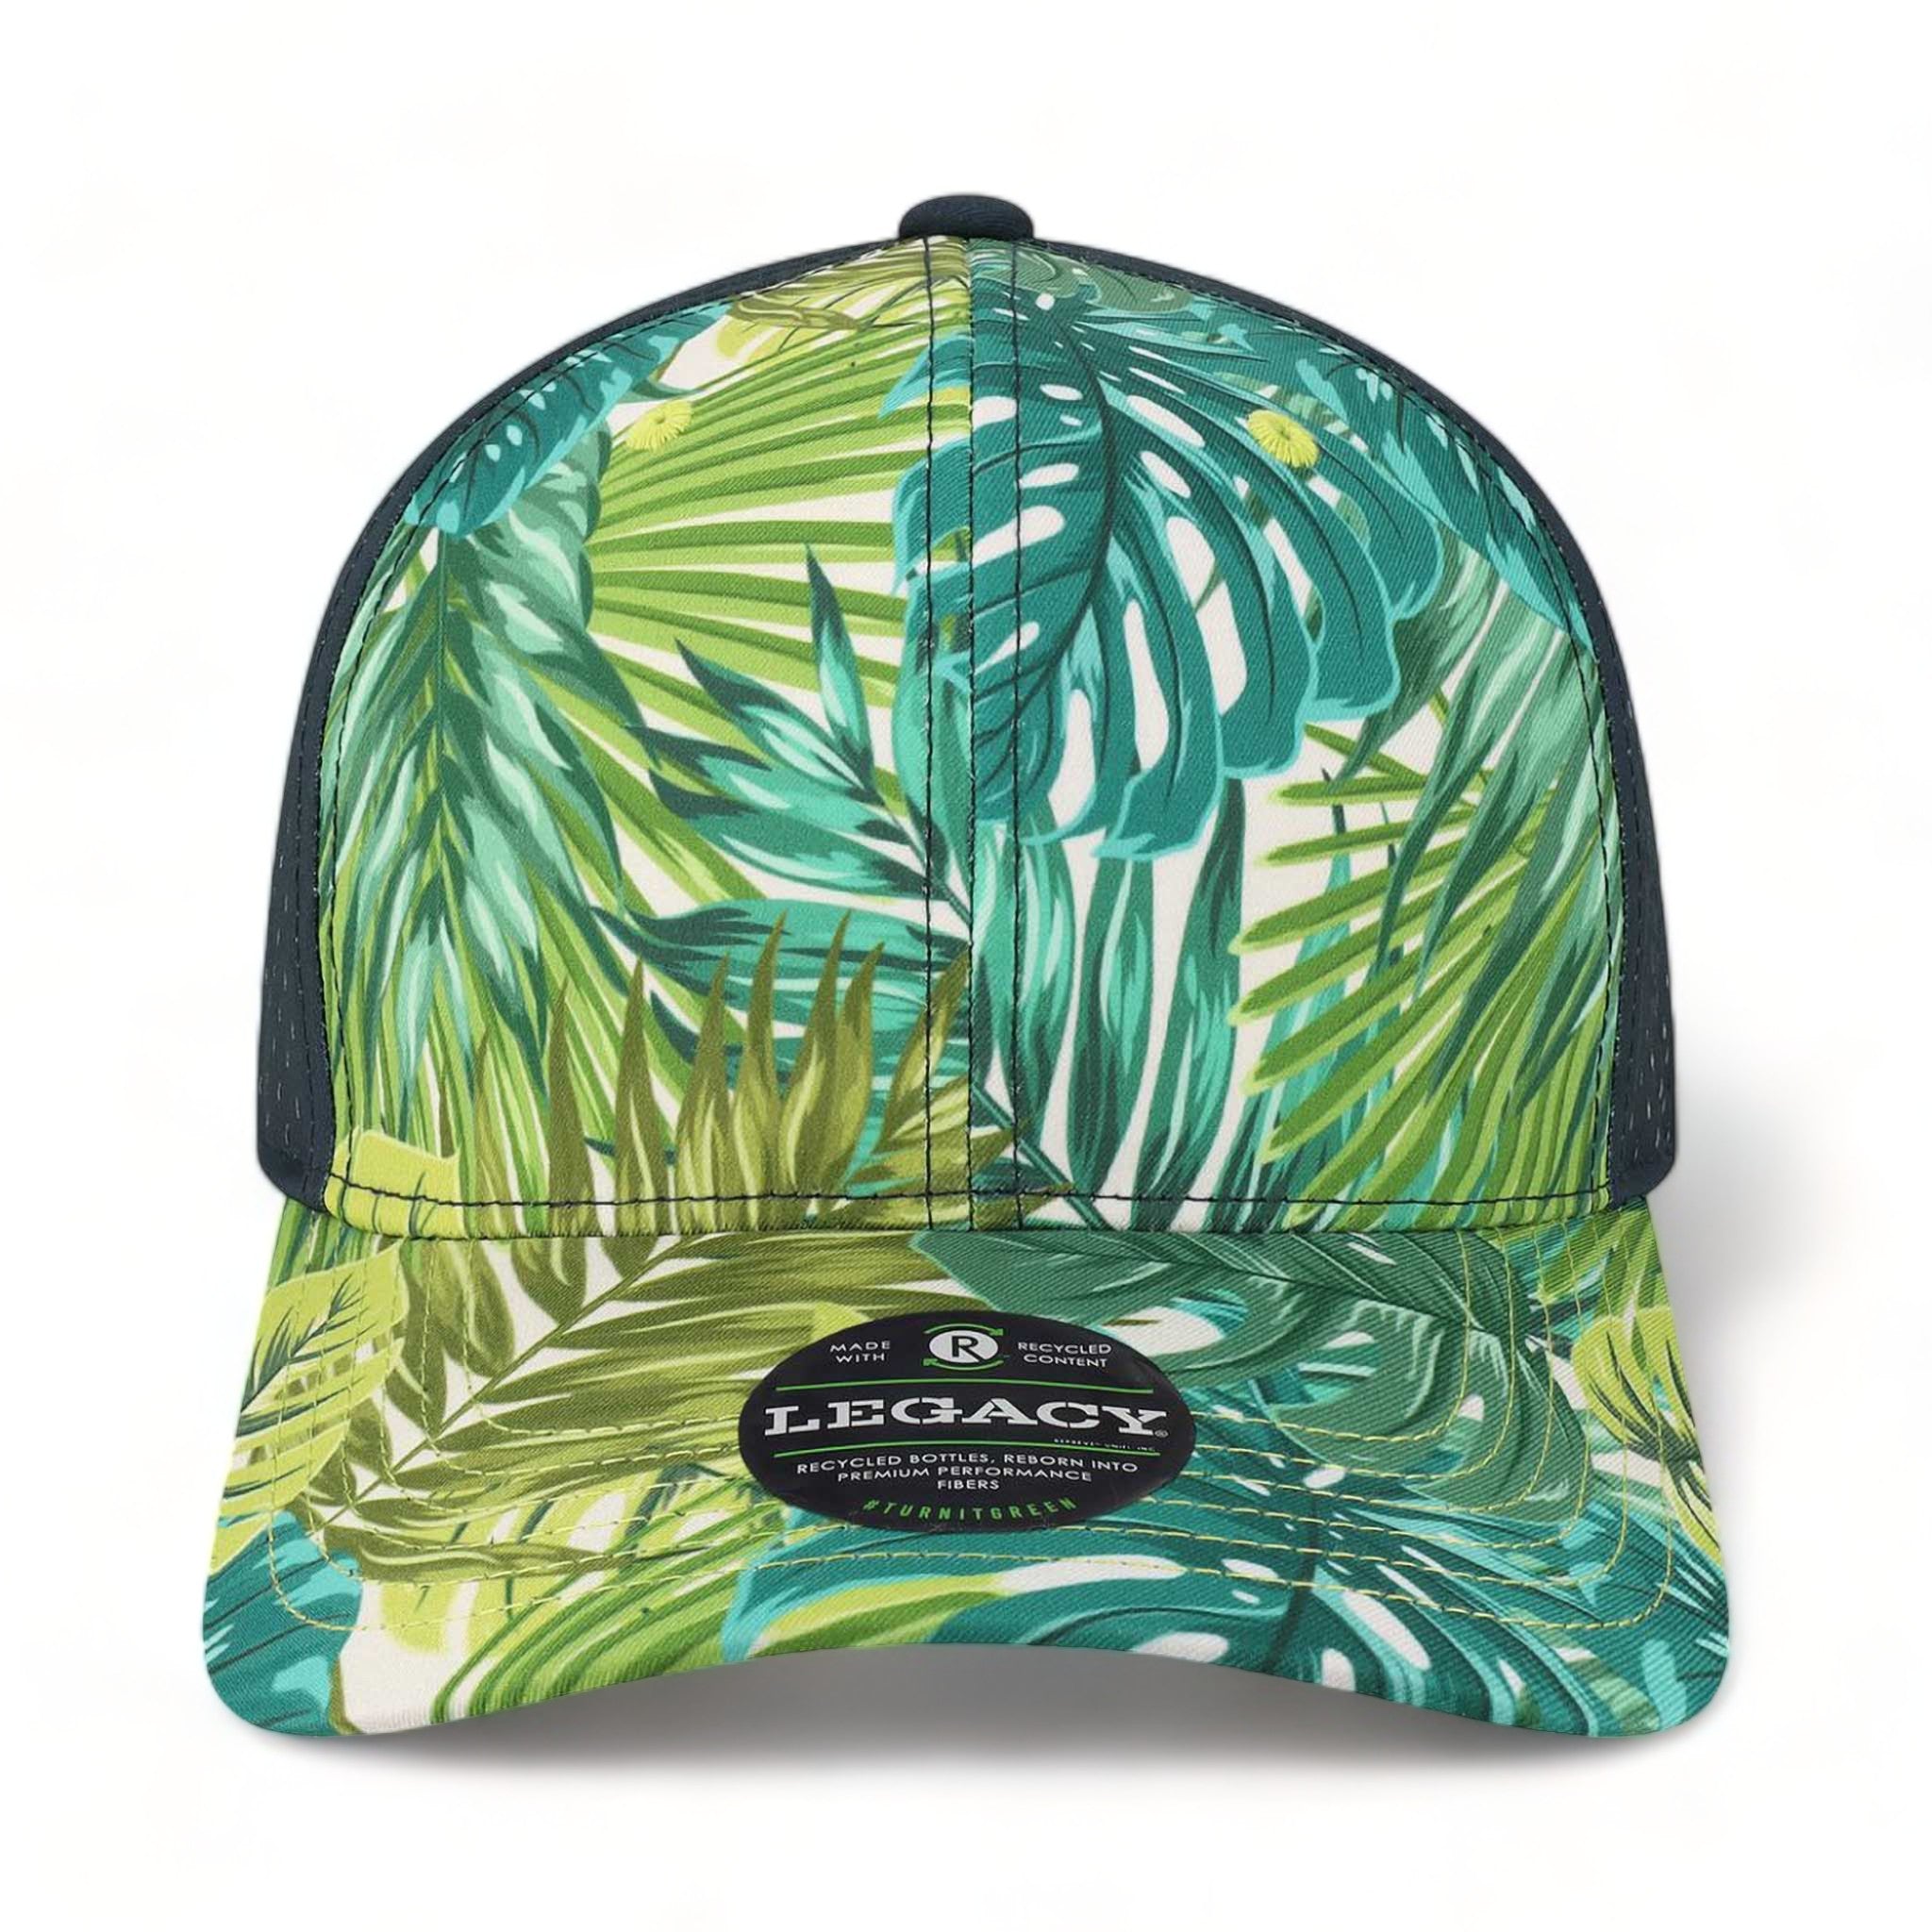 Front view of LEGACY REMPA custom hat in tropical blue leaves and navy